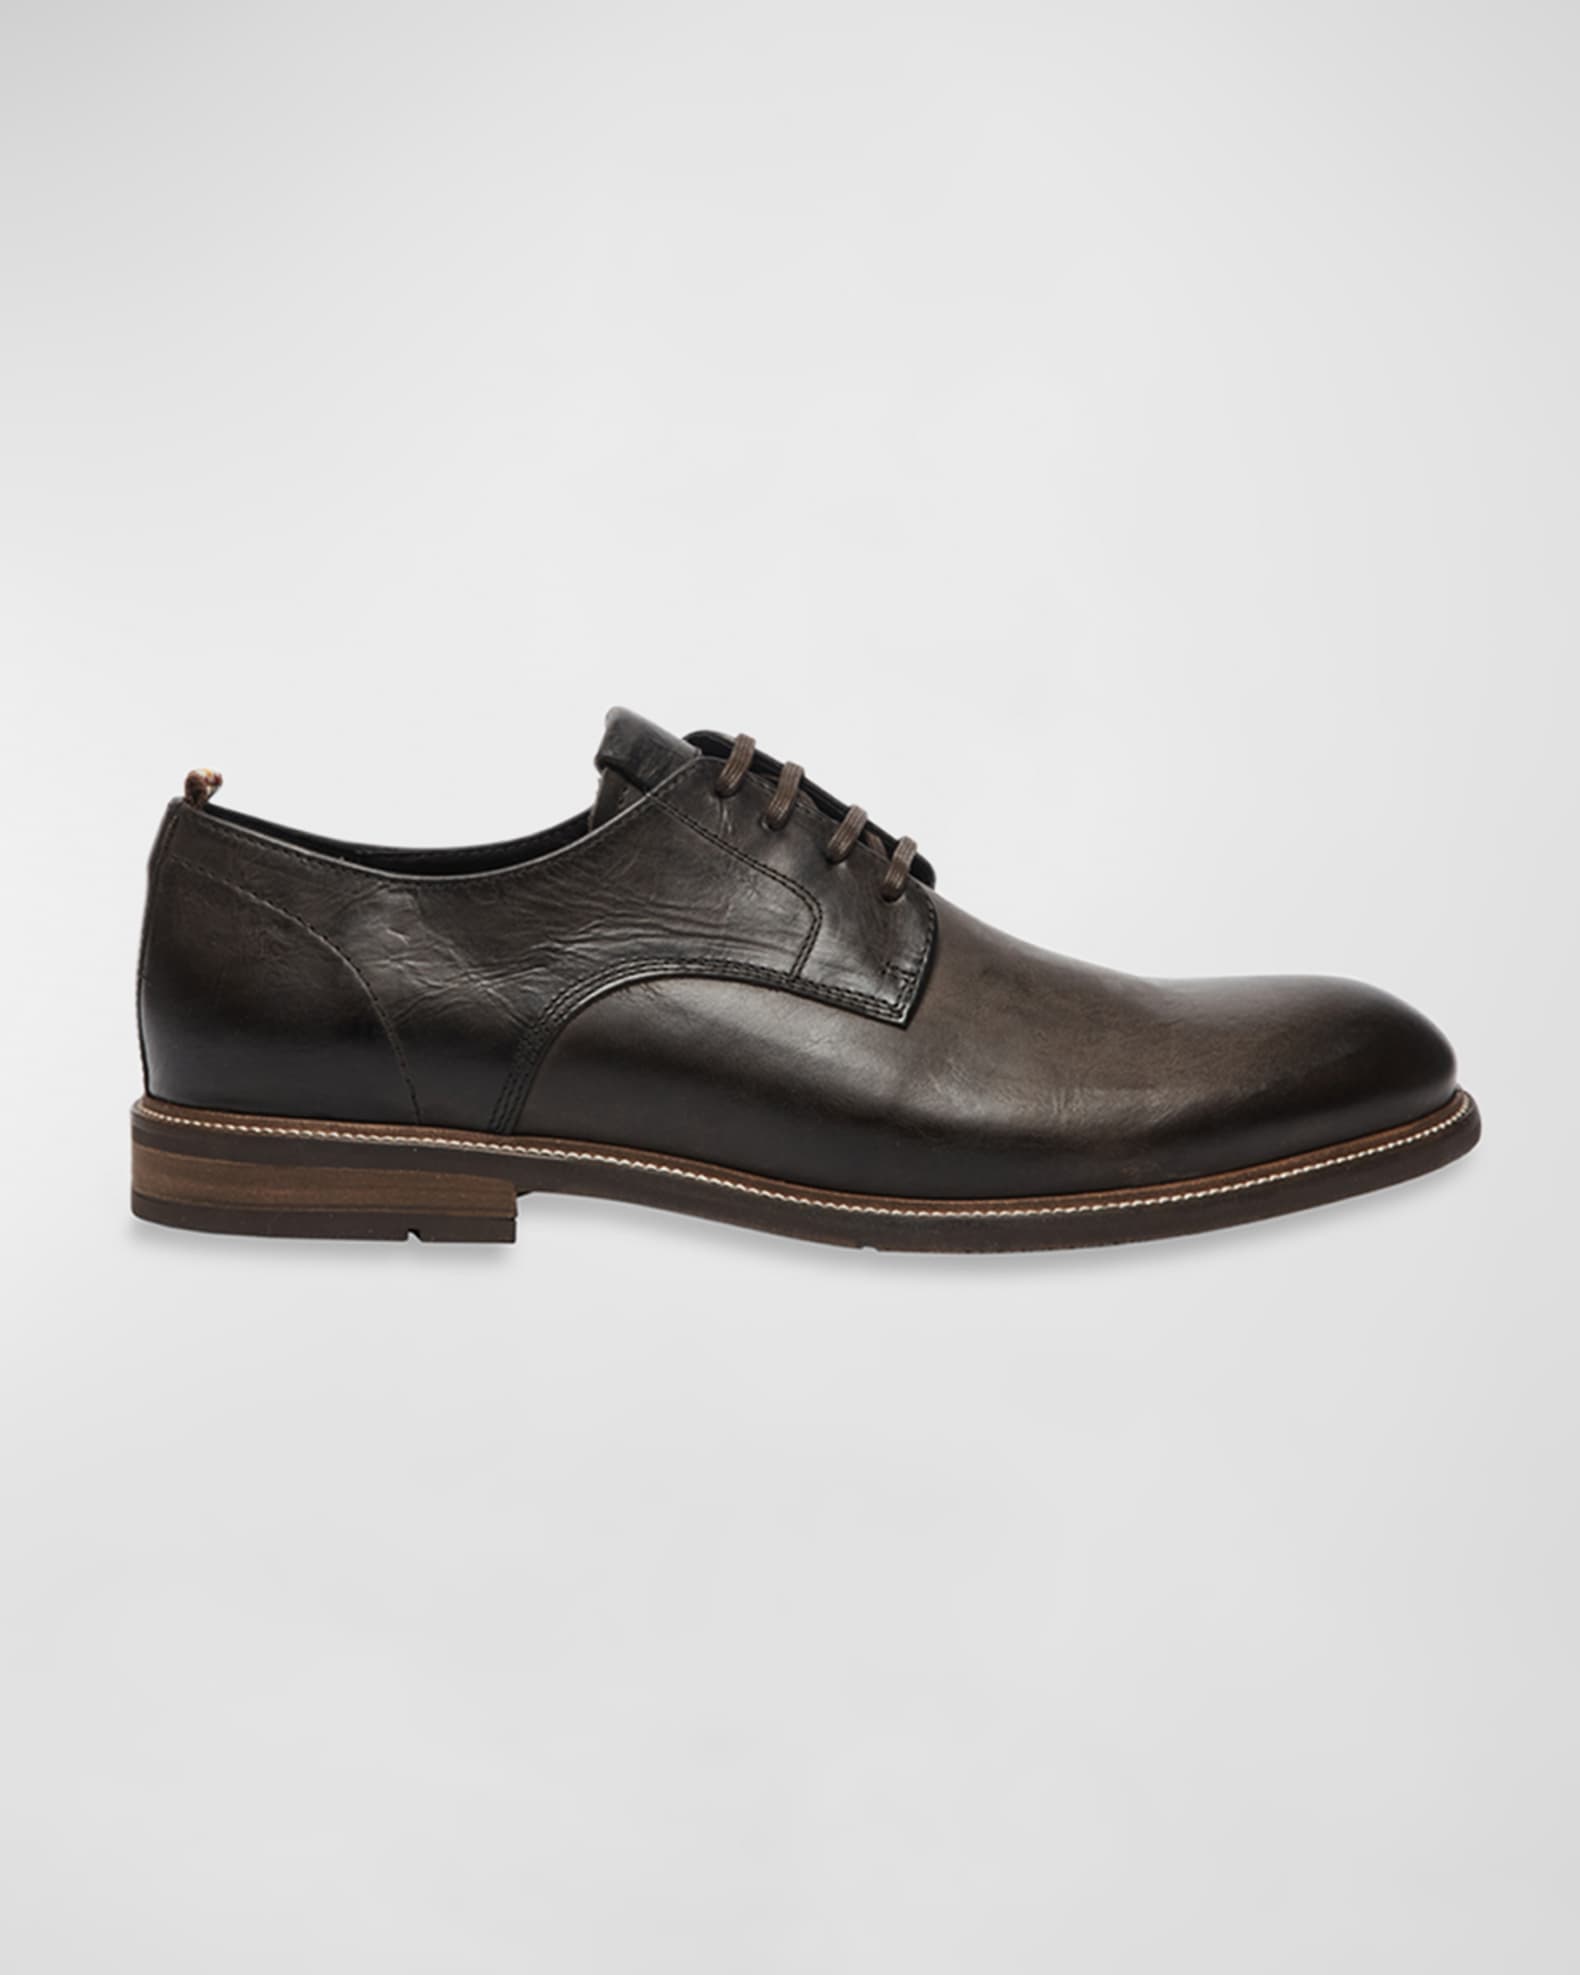 LV Formal Dimension High Derbies - Luxury Lace-ups and Buckles